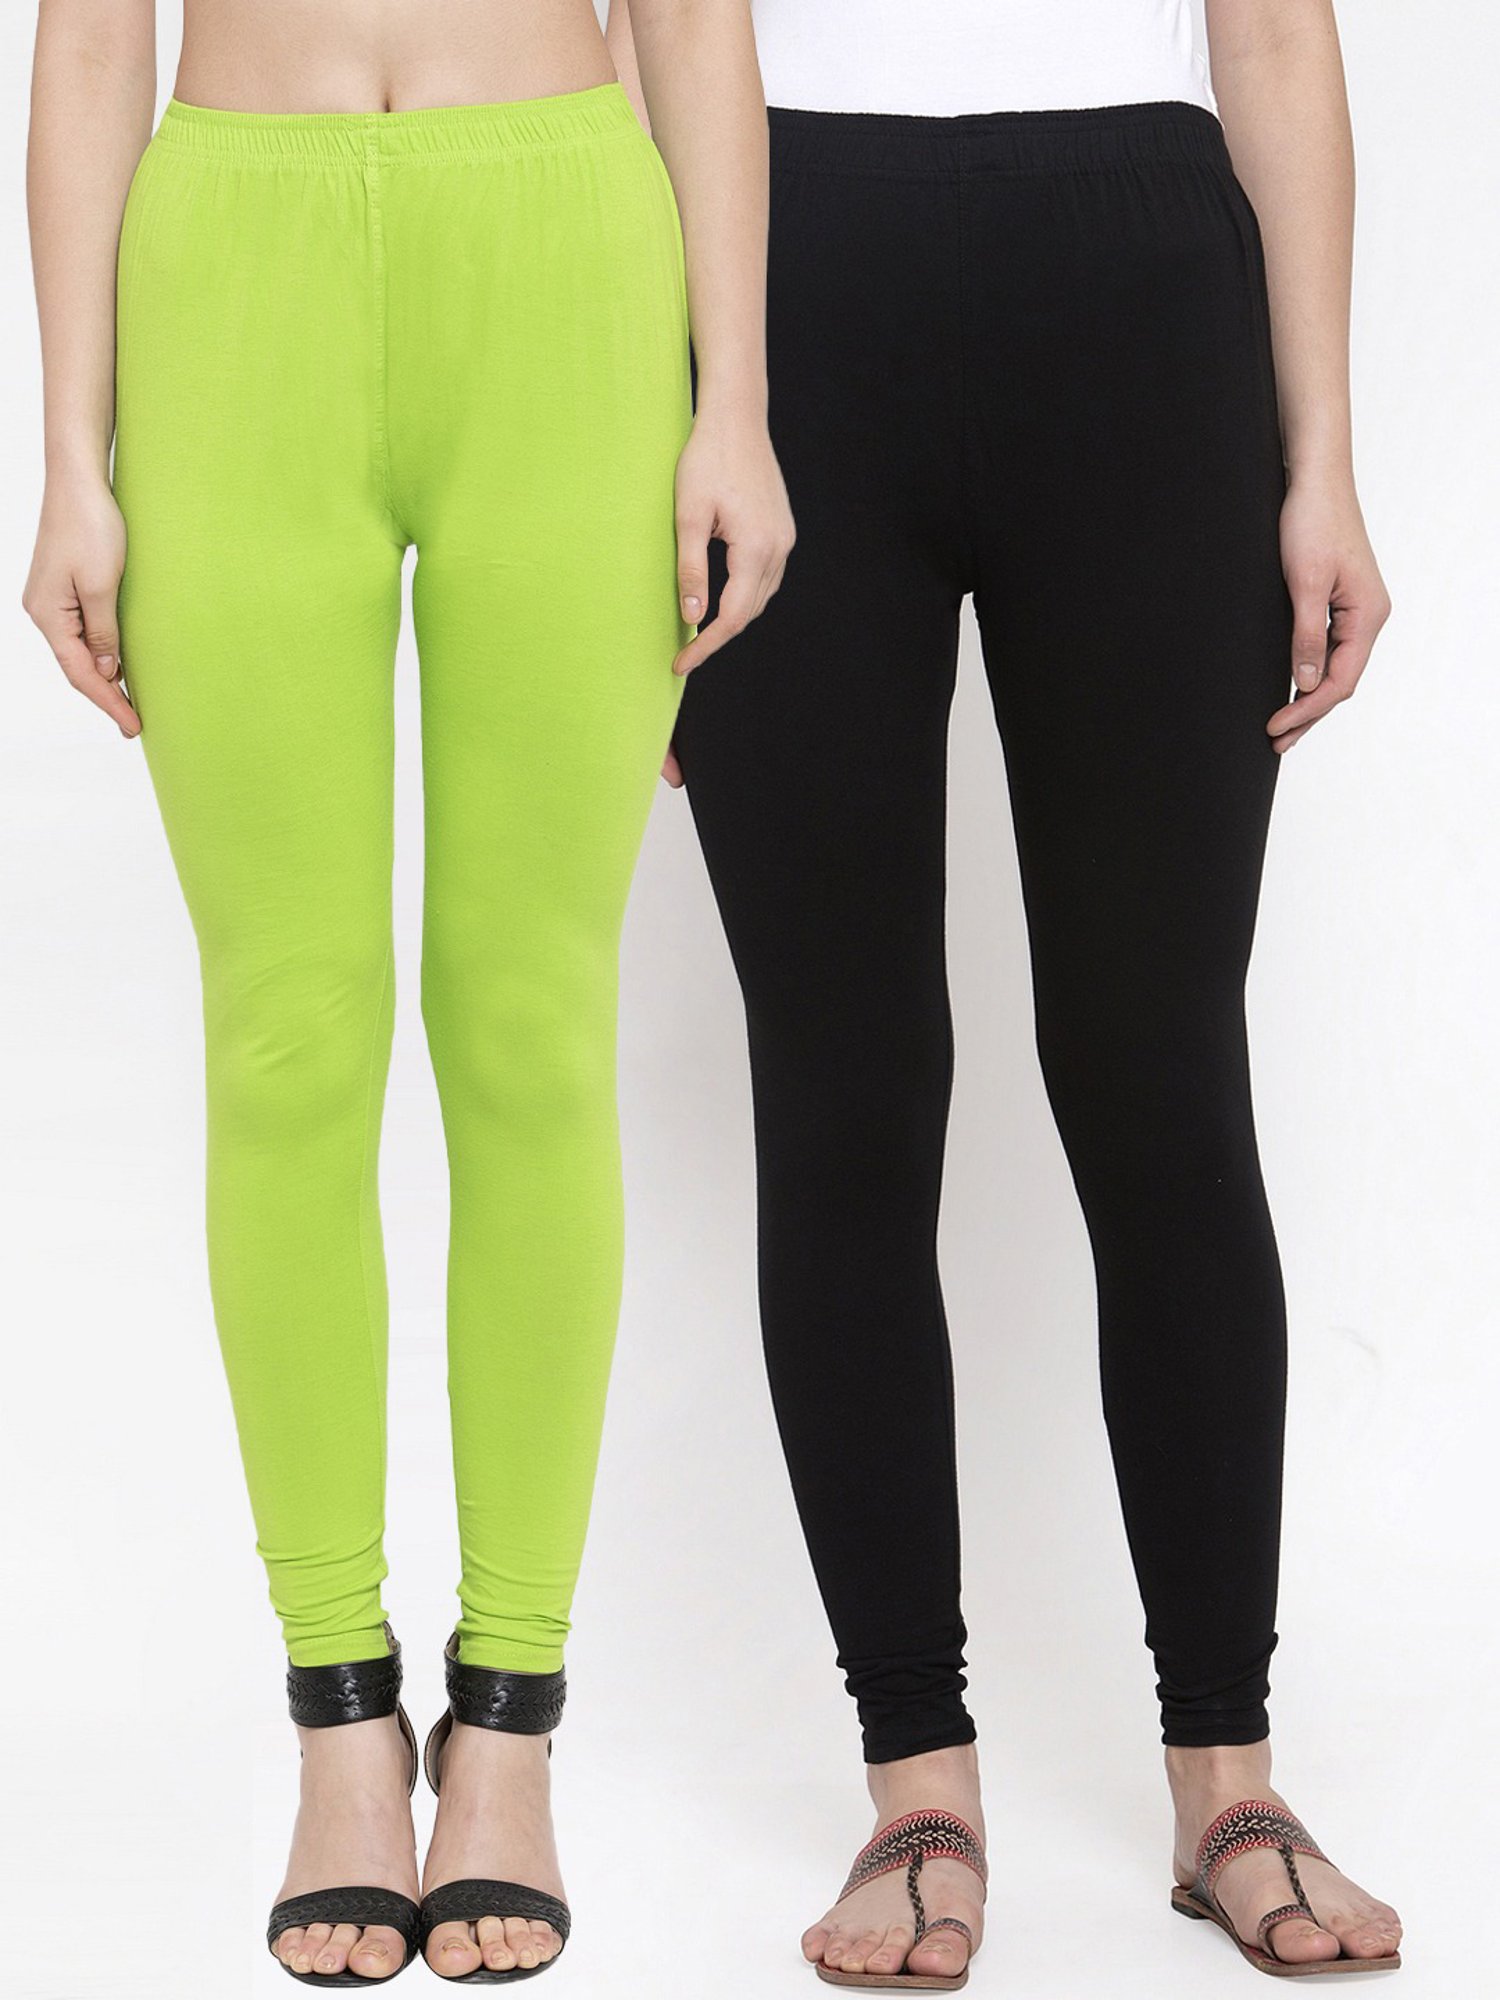 Women Ankle Length Leggings Colors Lime Green Free Size Free Shipping - Etsy